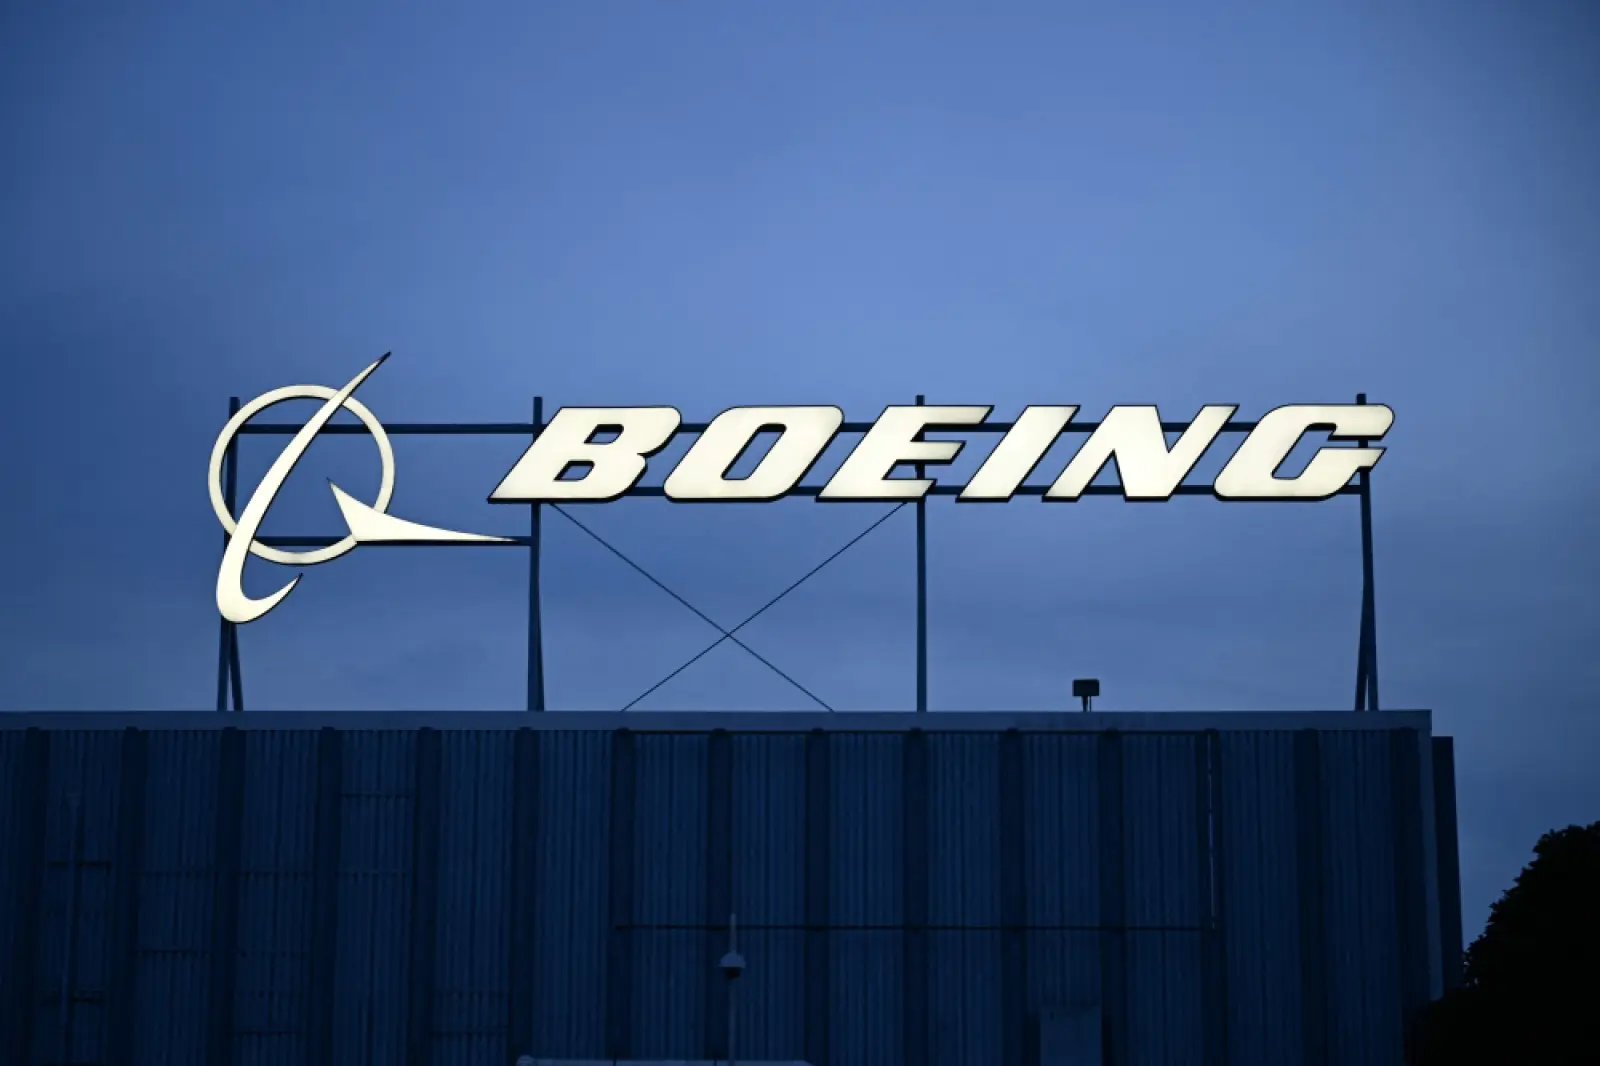 Boeing, which is facing controversies, announced the acquisition of Spirit Aerosystems, deal worth $4.7 billion